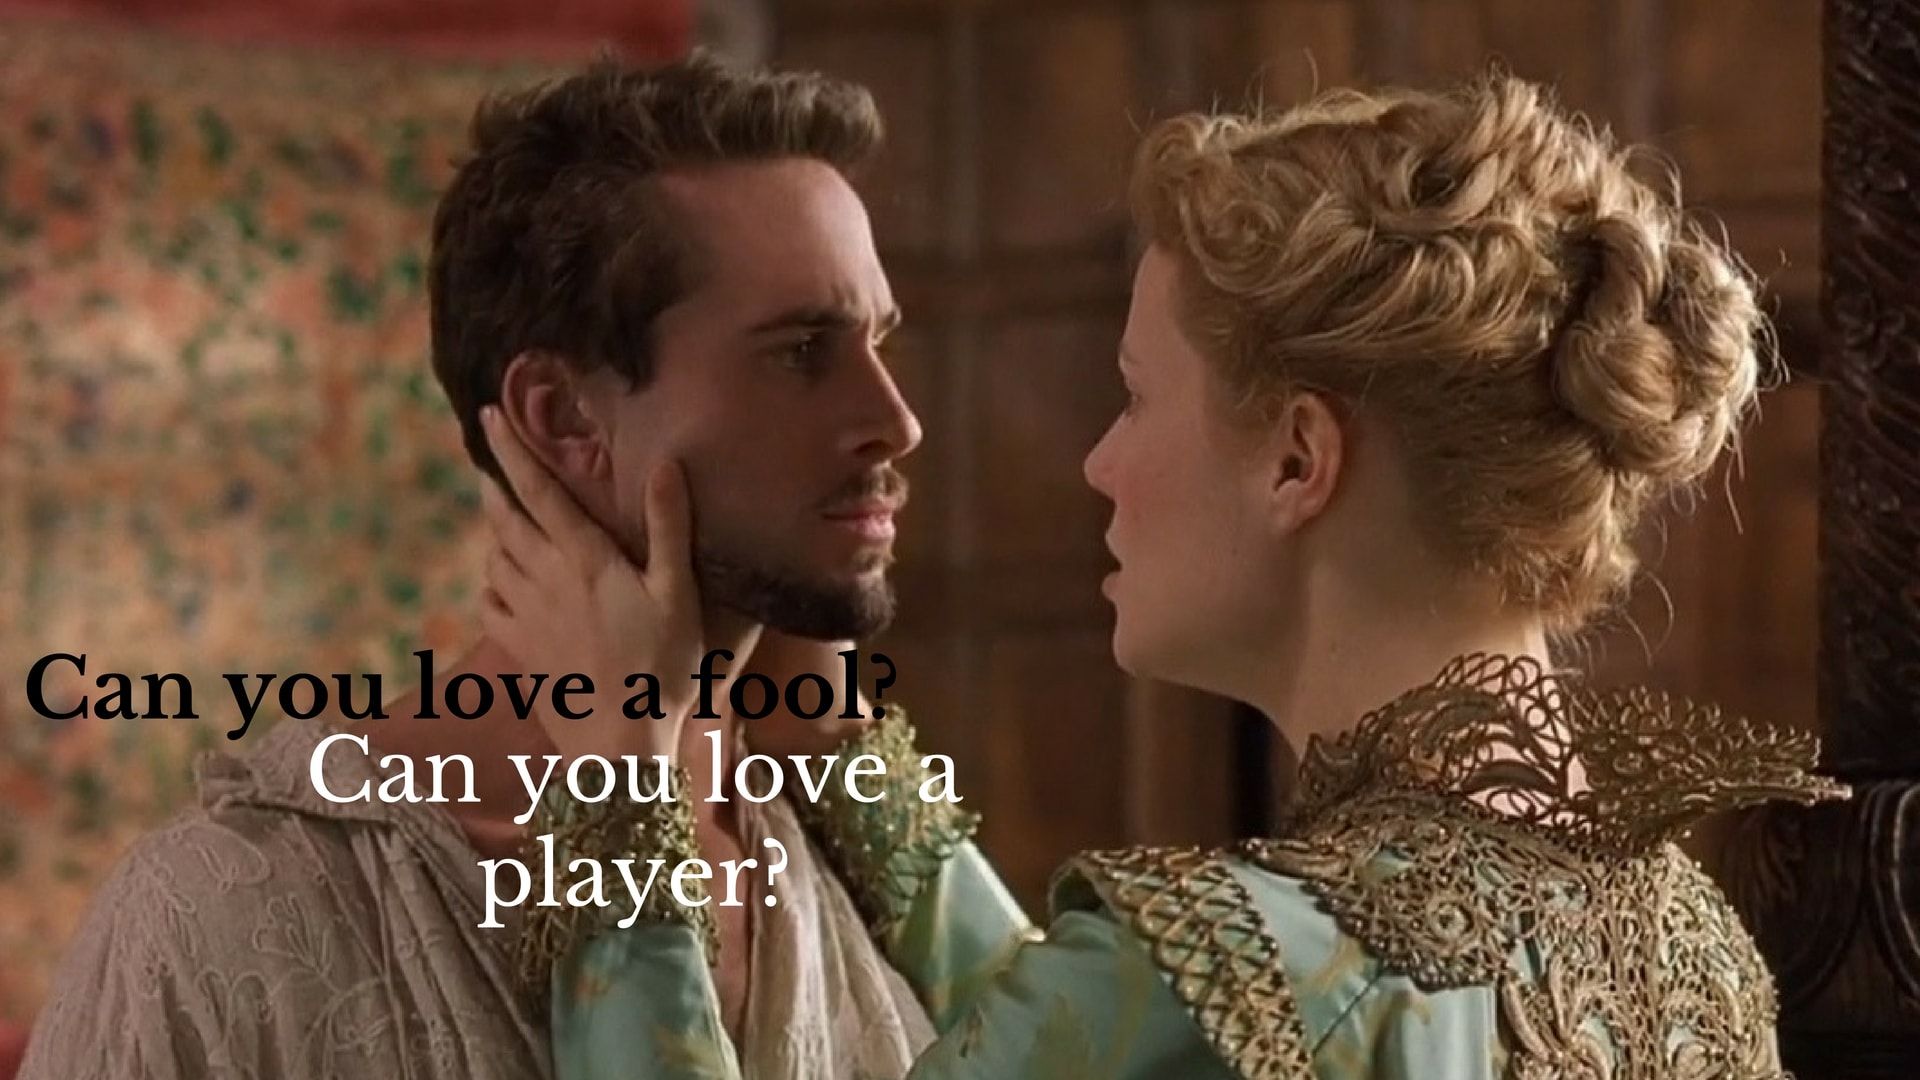 Dialogues To Remember The Movie 'Shakespeare In Love' By!